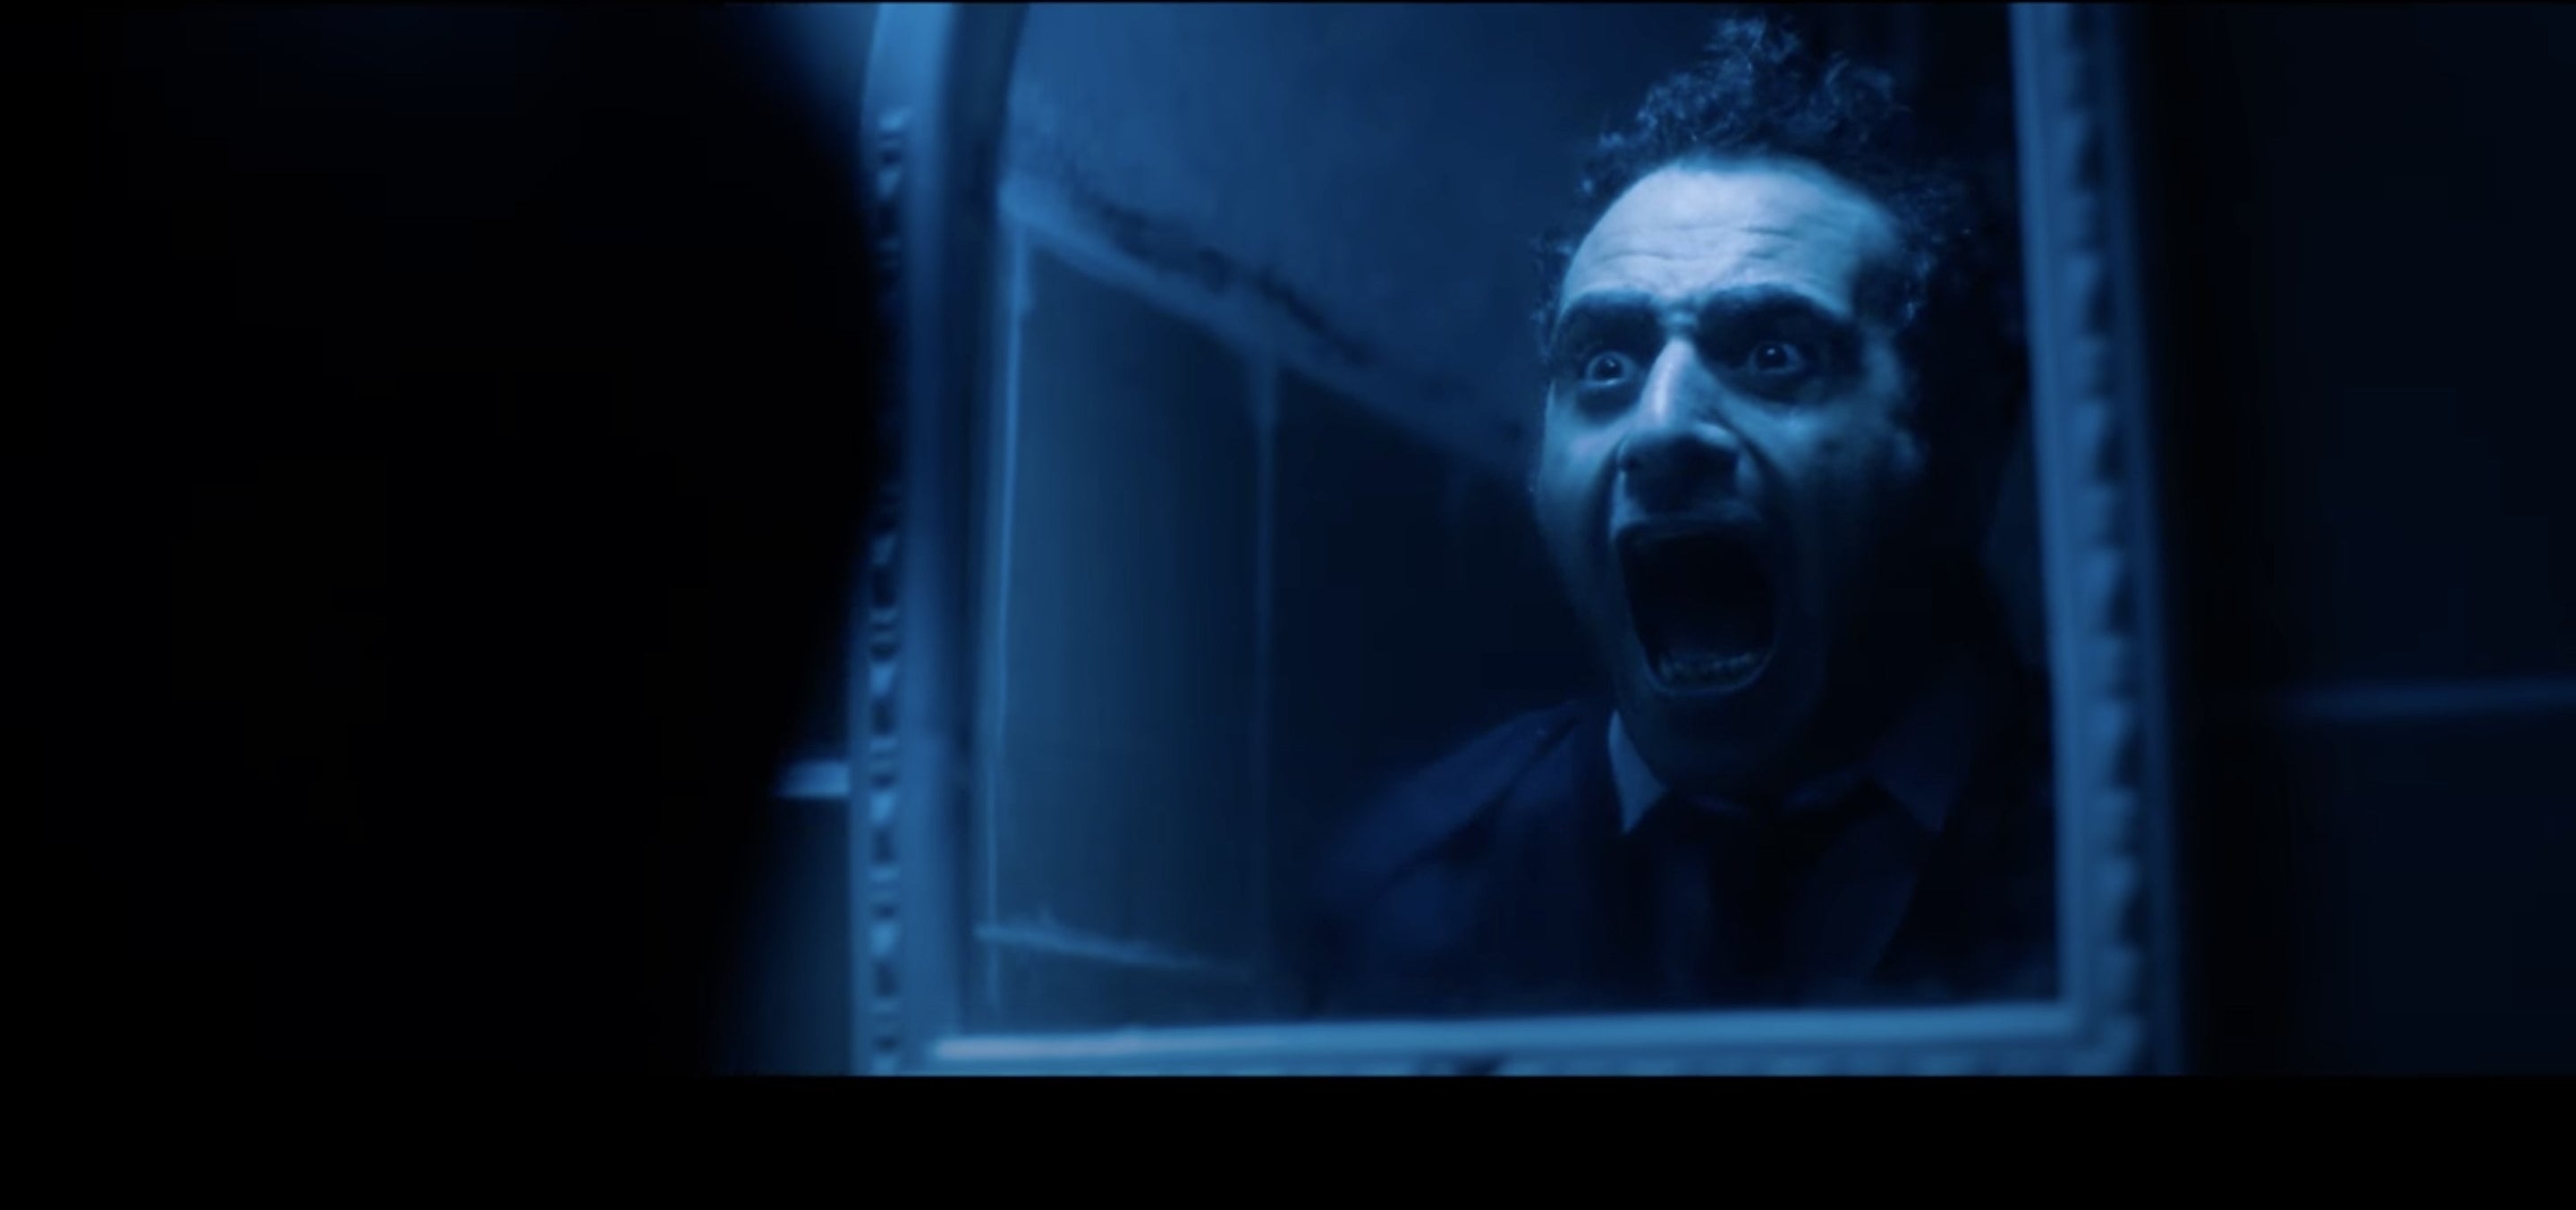 Man screaming in a mirror